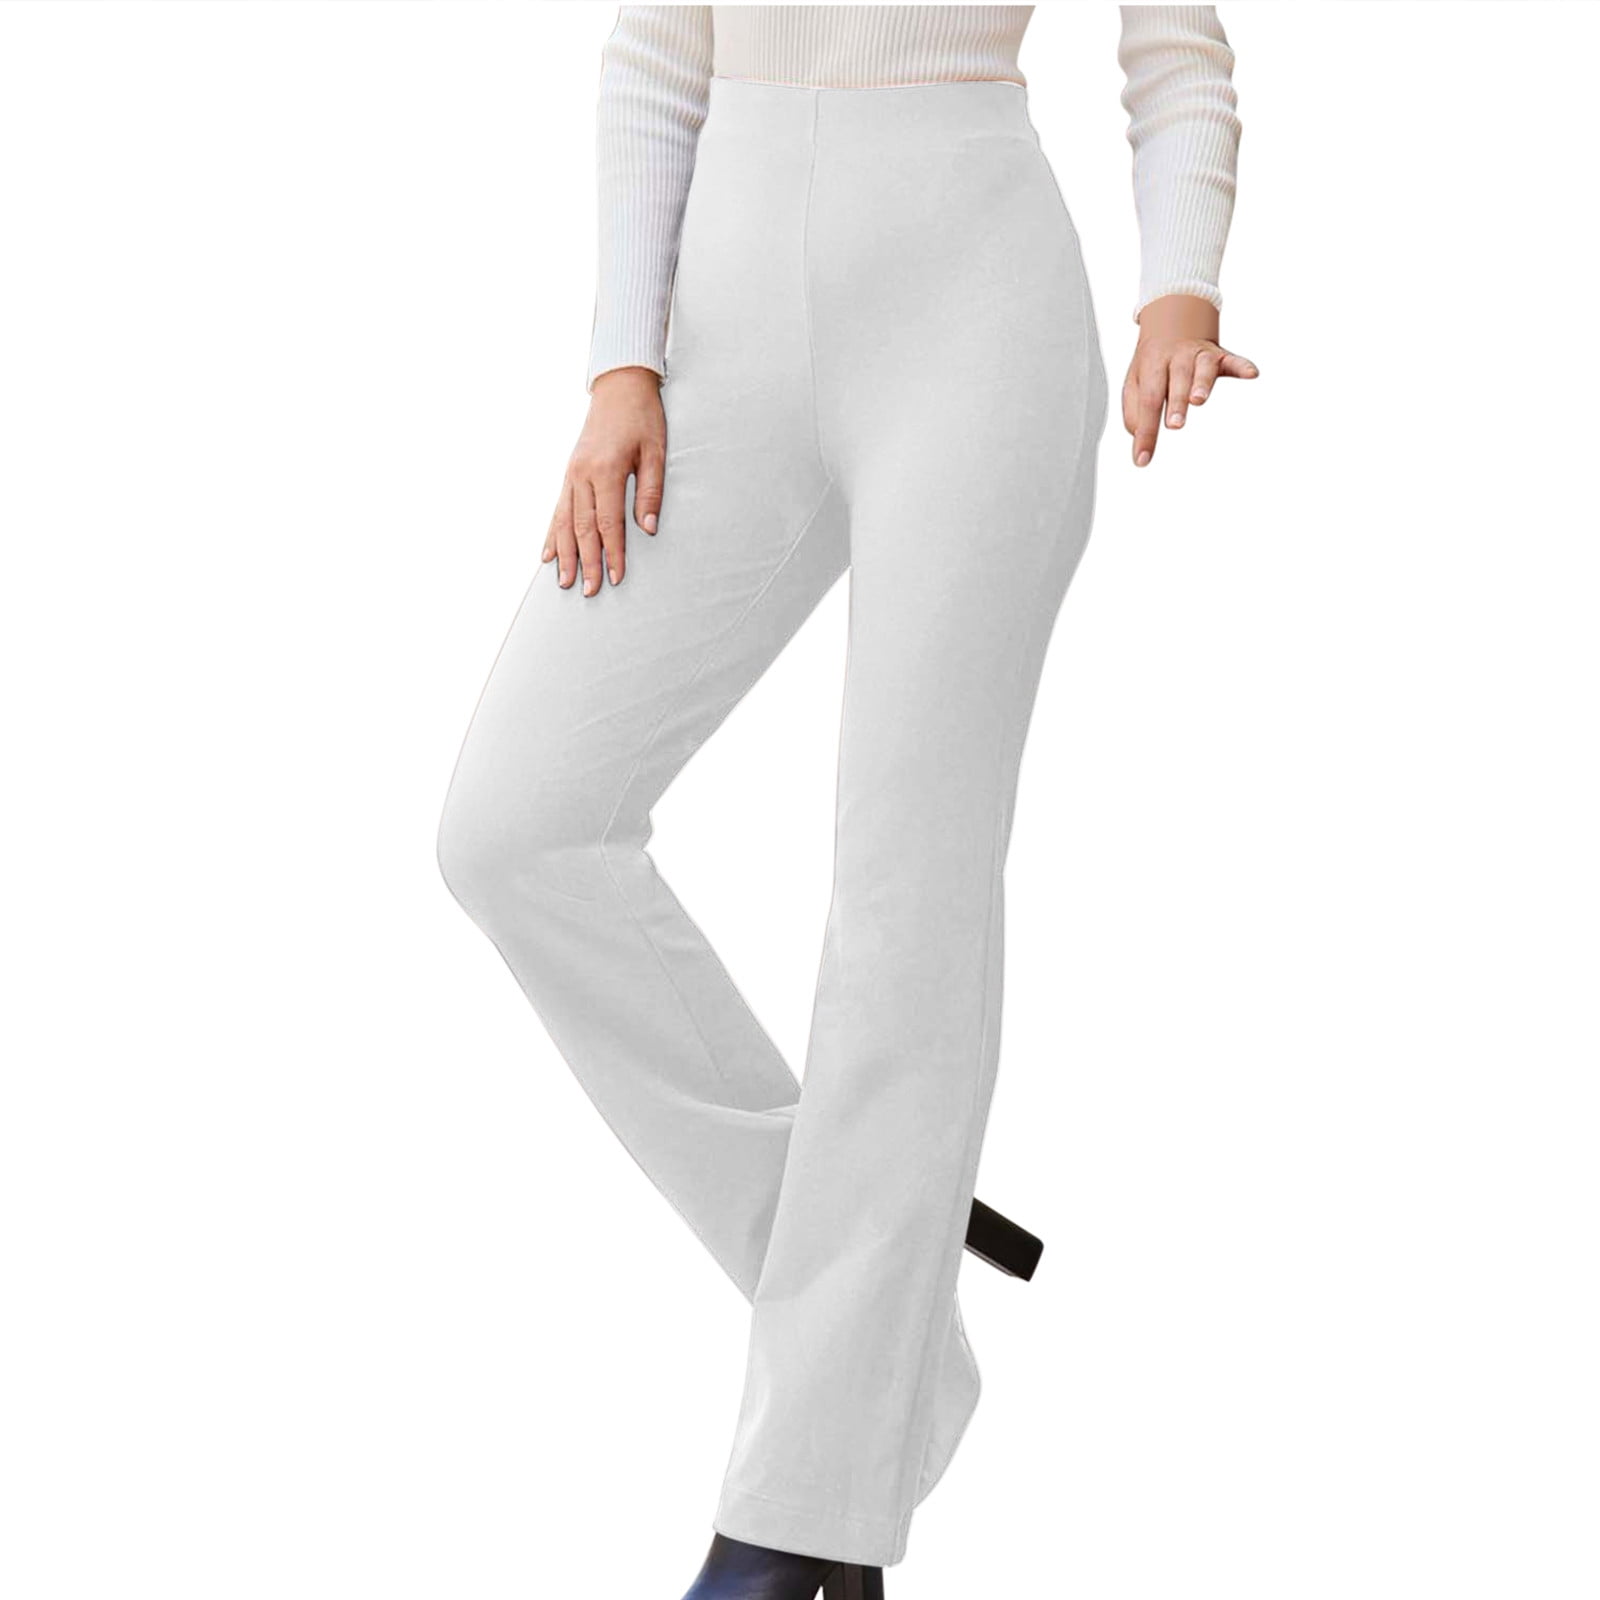 SSAAVKUY Womens Slim Fit Flare Solid Suit Pants Leisure Trousers Bell-bottoms  Solid Color Pants Comfy Holiday Cool Girl Dressy Fashion Bottoms White 4 